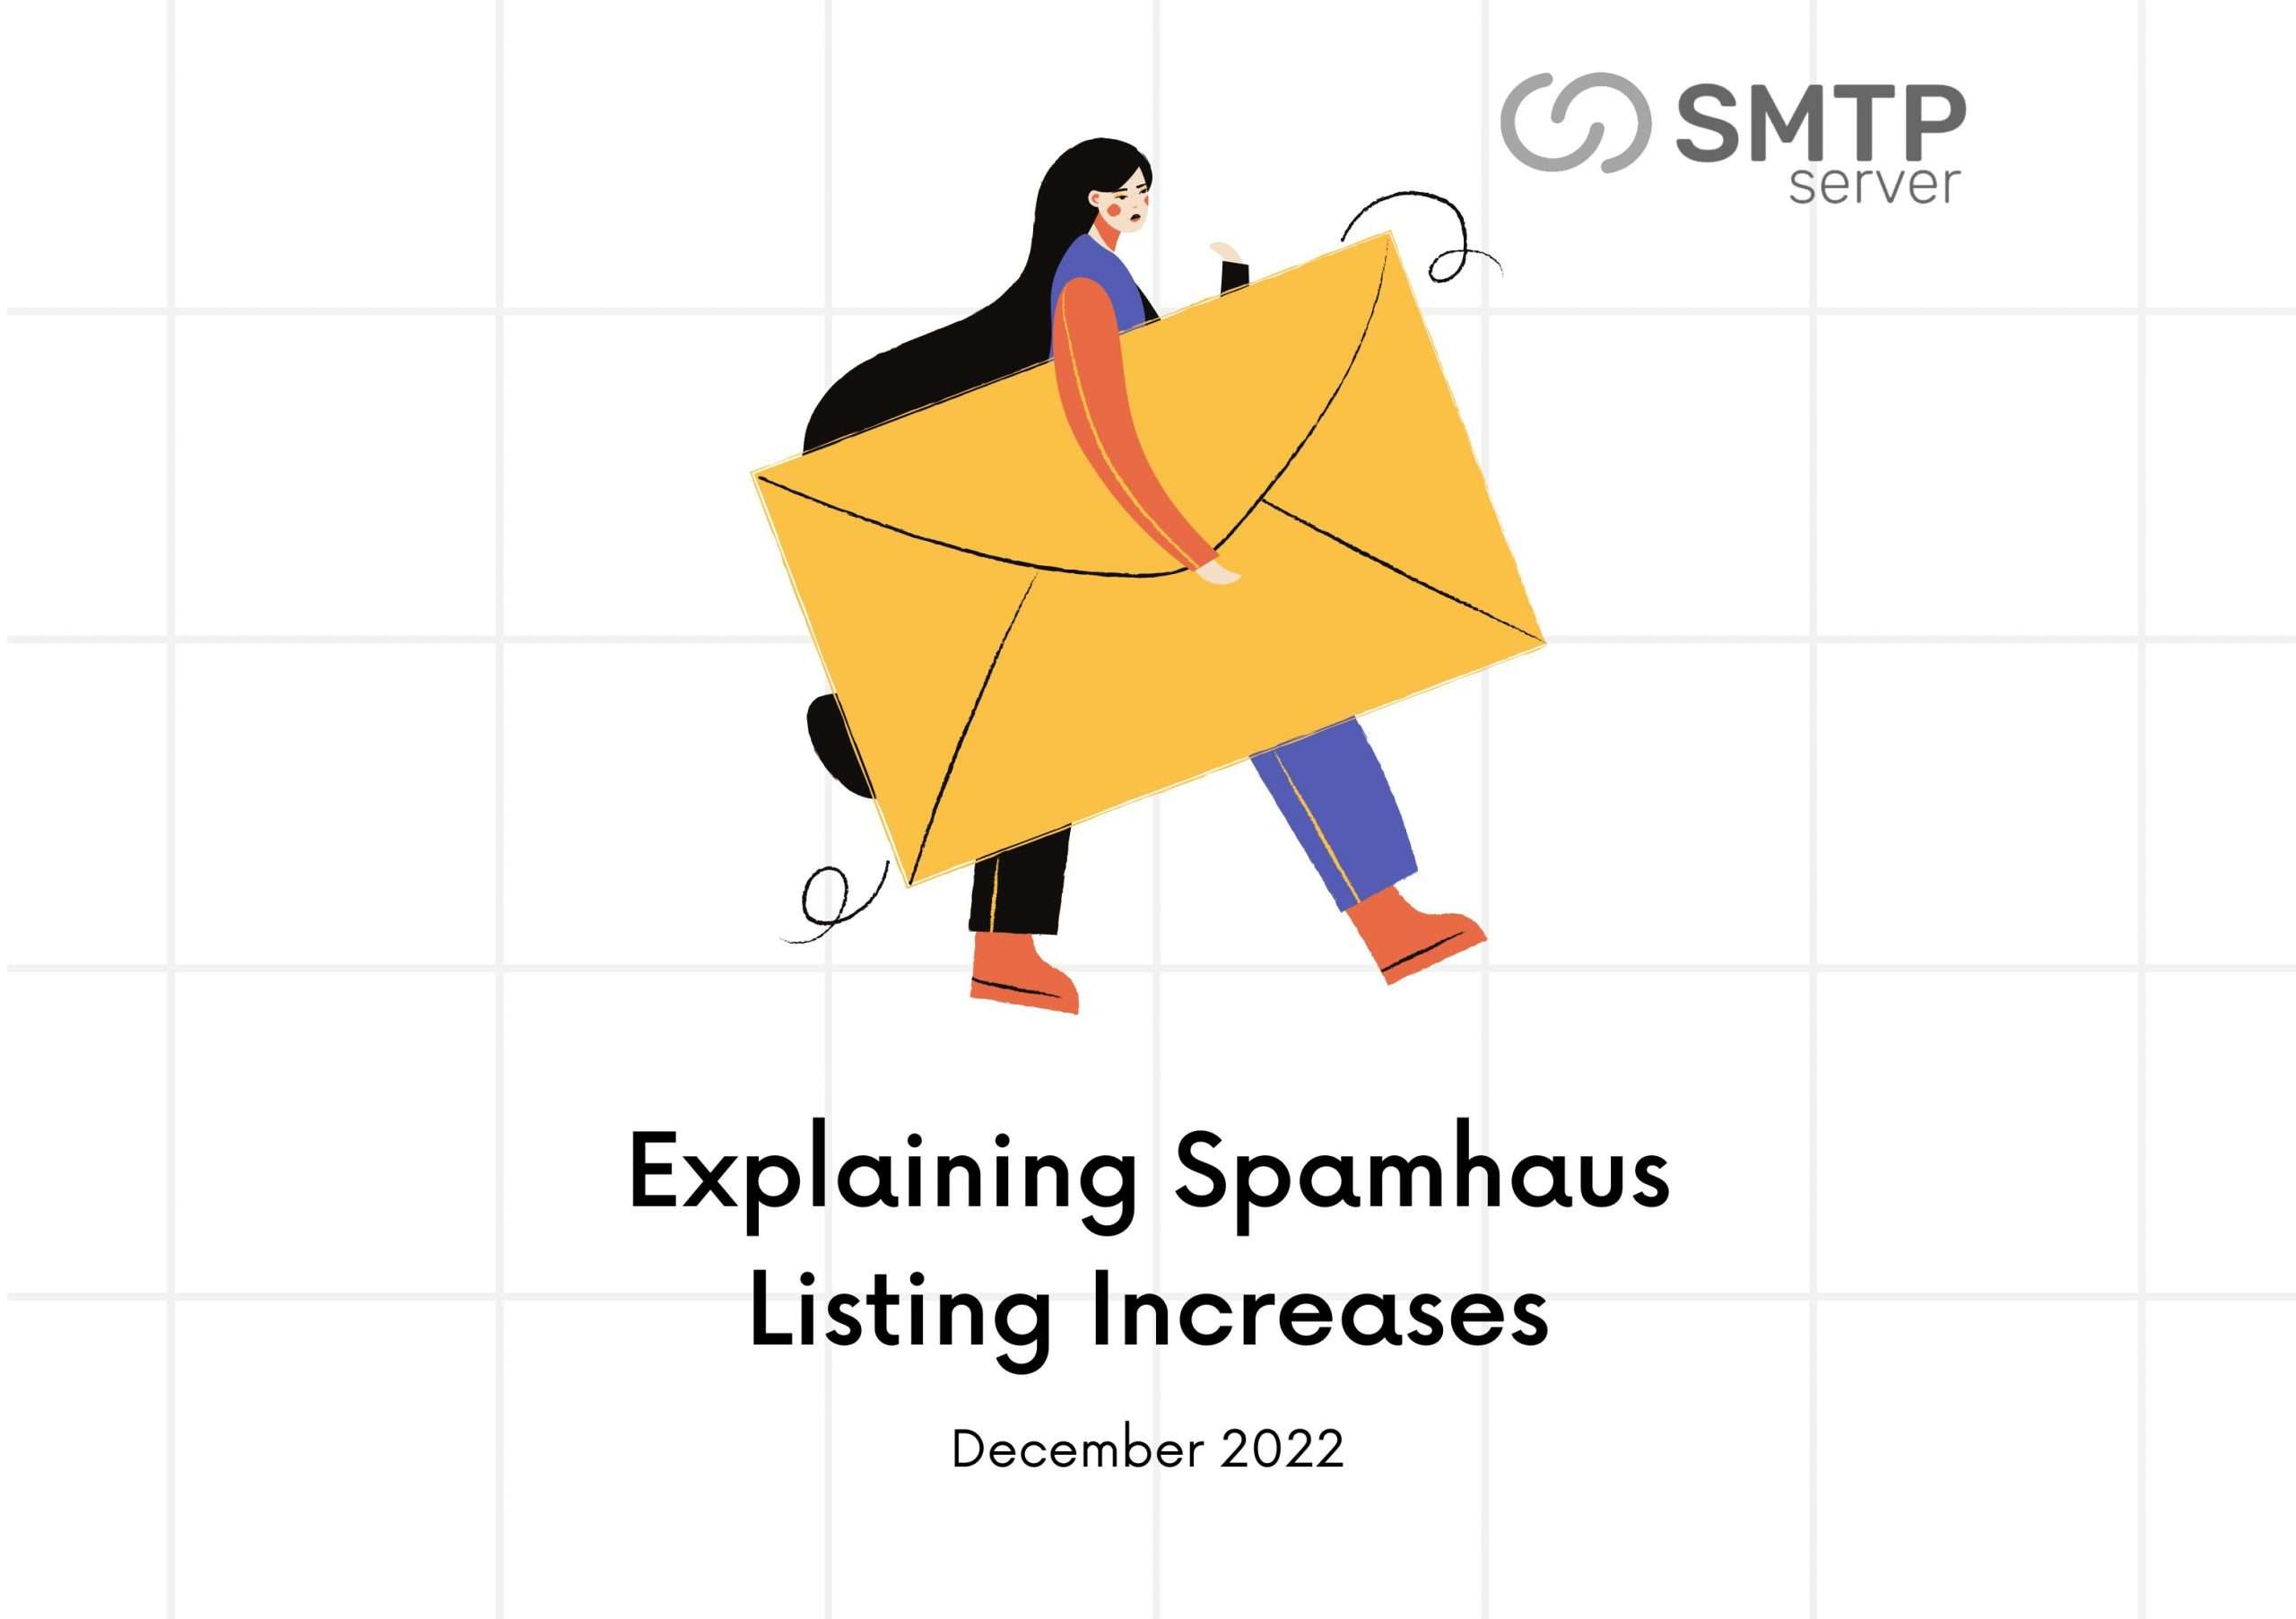 Explaining Spamhaus Listing Increases